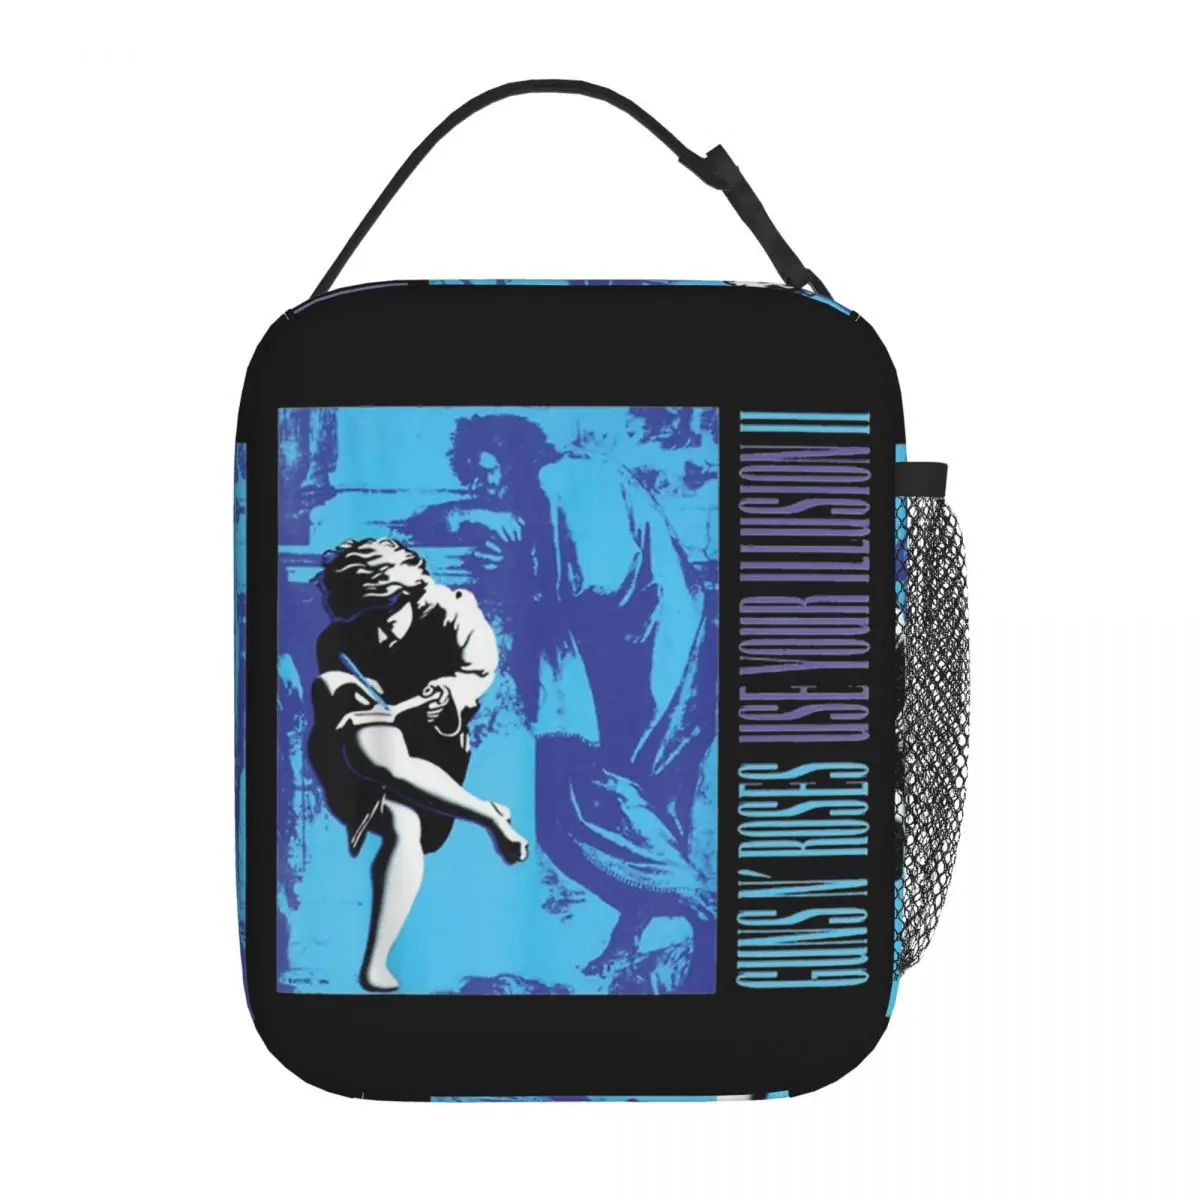 

Guns N Roses Use Your Illusion Insulated Lunch Bags Meal Container Thermal Bag Tote Lunch Box School Outdoor Food Handbags